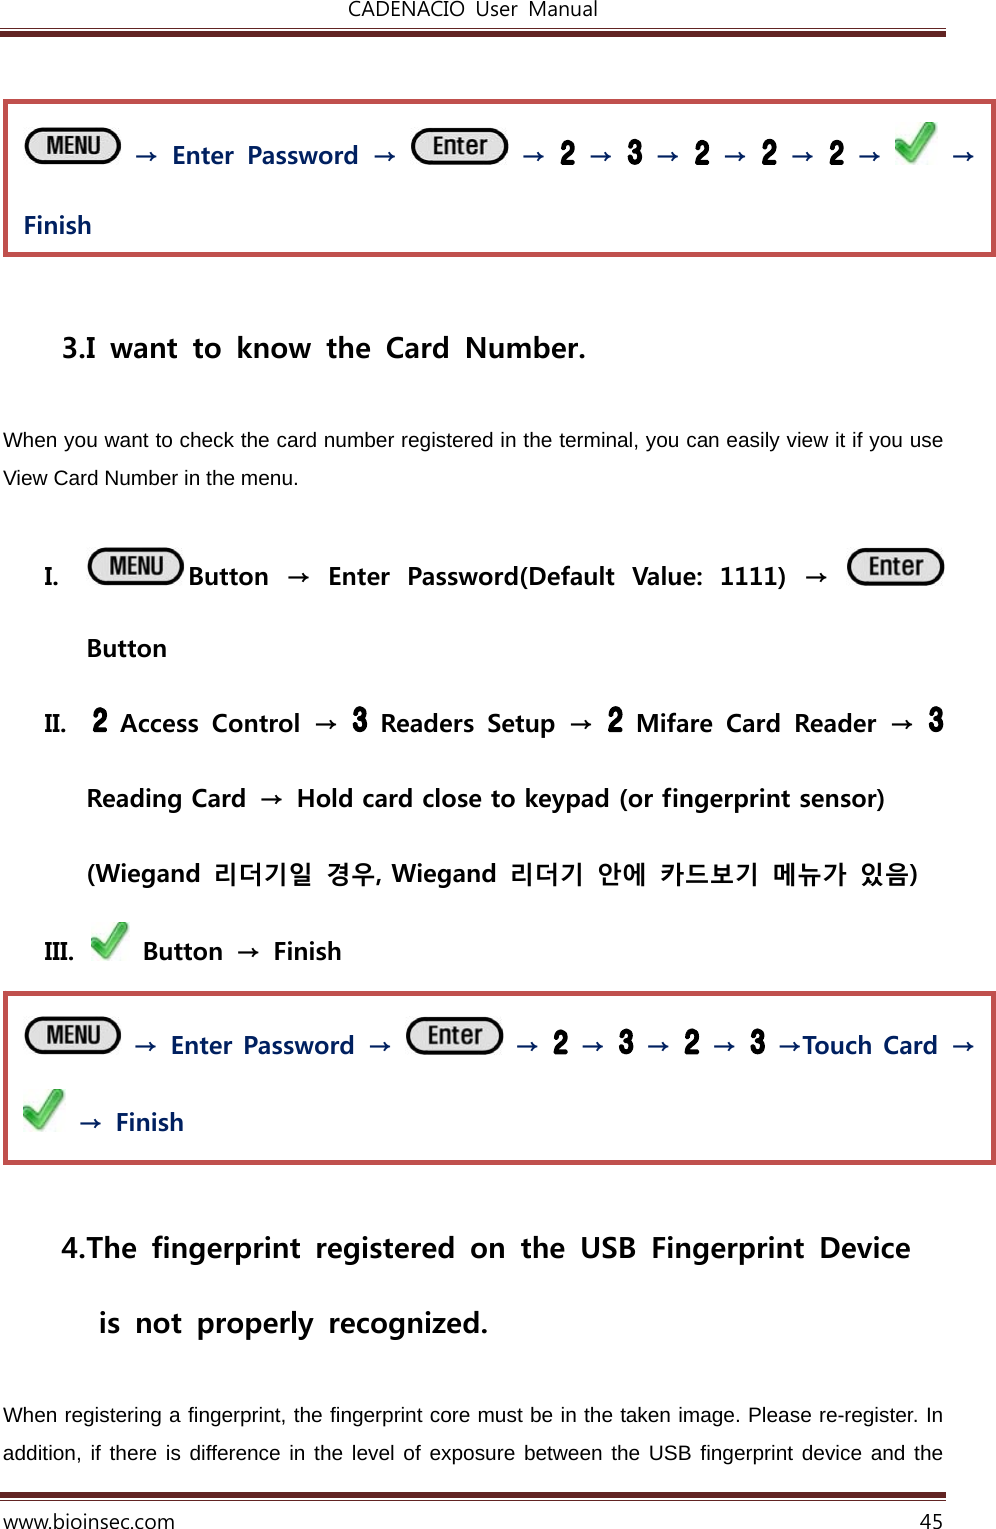 CADENACIO  User  Manual  www.bioinsec.com 45    3. I want to know the Card Number.  When you want to check the card number registered in the terminal, you can easily view it if you use View Card Number in the menu.    I. Button  →  Enter  Password(Default  Value:  1111)  →   Button II.   Access  Control  →    Readers  Setup  →    Mifare  Card  Reader  →   Reading Card → Hold card close to keypad (or fingerprint sensor) (Wiegand  리더기일  경우, Wiegand  리더기  안에  카드보기  메뉴가  있음) III.   Button  →  Finish   4. The  fingerprint  registered  on  the  USB  Fingerprint  Device   is not properly recognized.  When registering a fingerprint, the fingerprint core must be in the taken image. Please re-register. In addition, if there is difference in the level of exposure between the USB fingerprint device and the  → Enter Password →   →   →   →   →   →Touch Card →   →  Finish  → Enter Password →   →   →   →   →   →   →   → Finish 